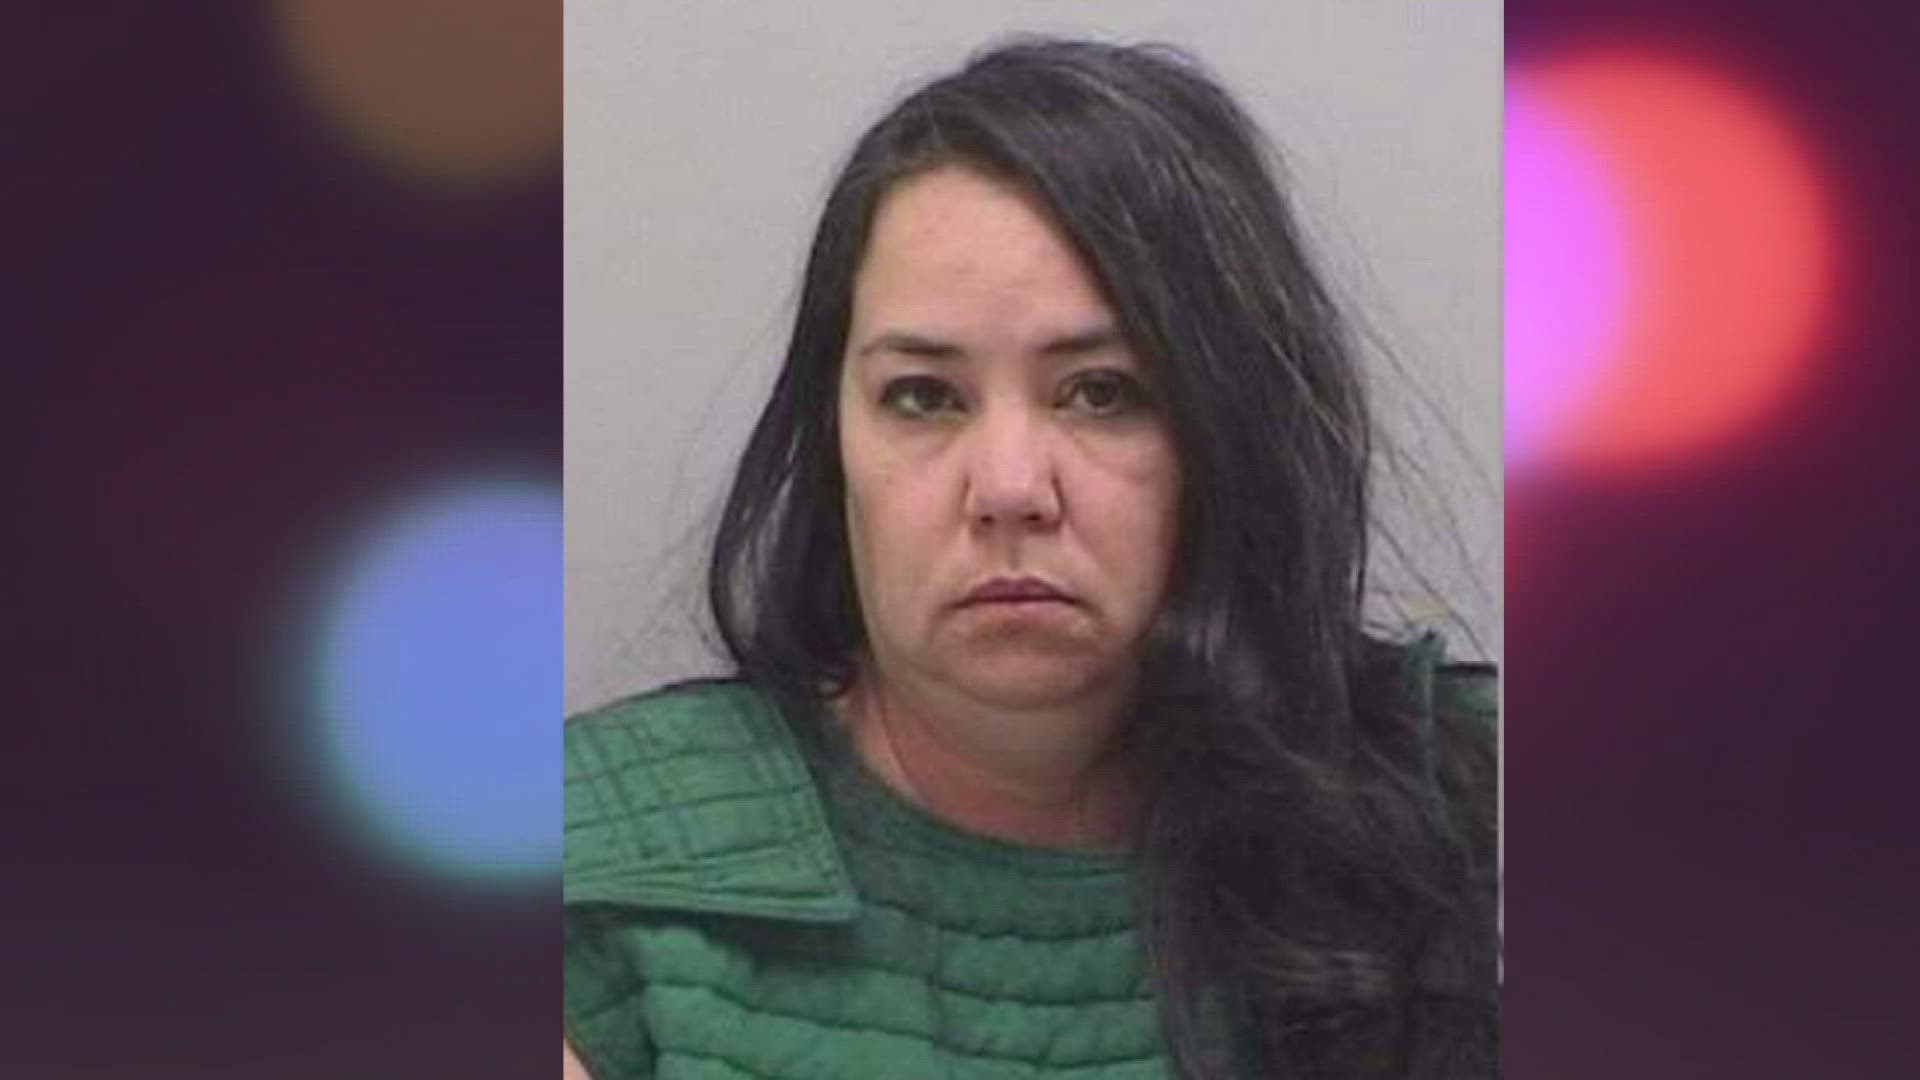 A Castle Rock woman was arrested on two counts of vehicular homicide and booked into the Douglas County Jail.